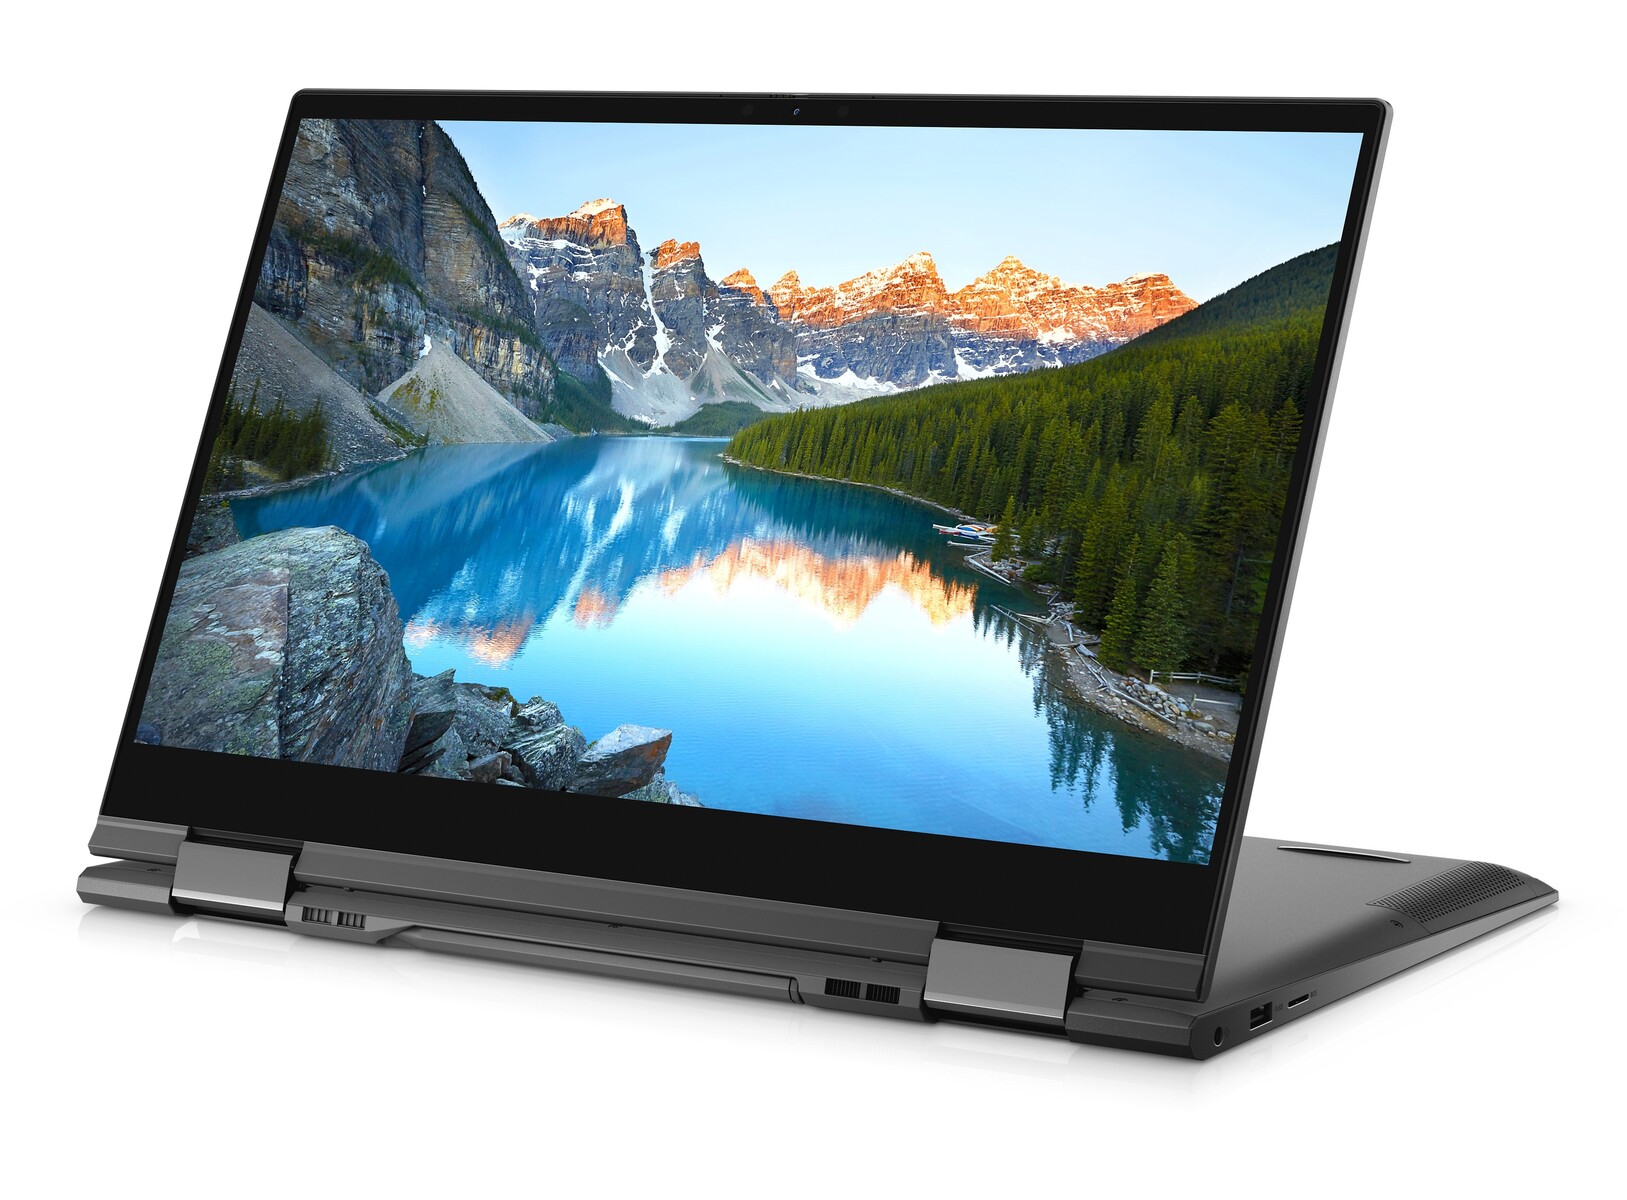  Dell Inspiron 15 7500 Notebook